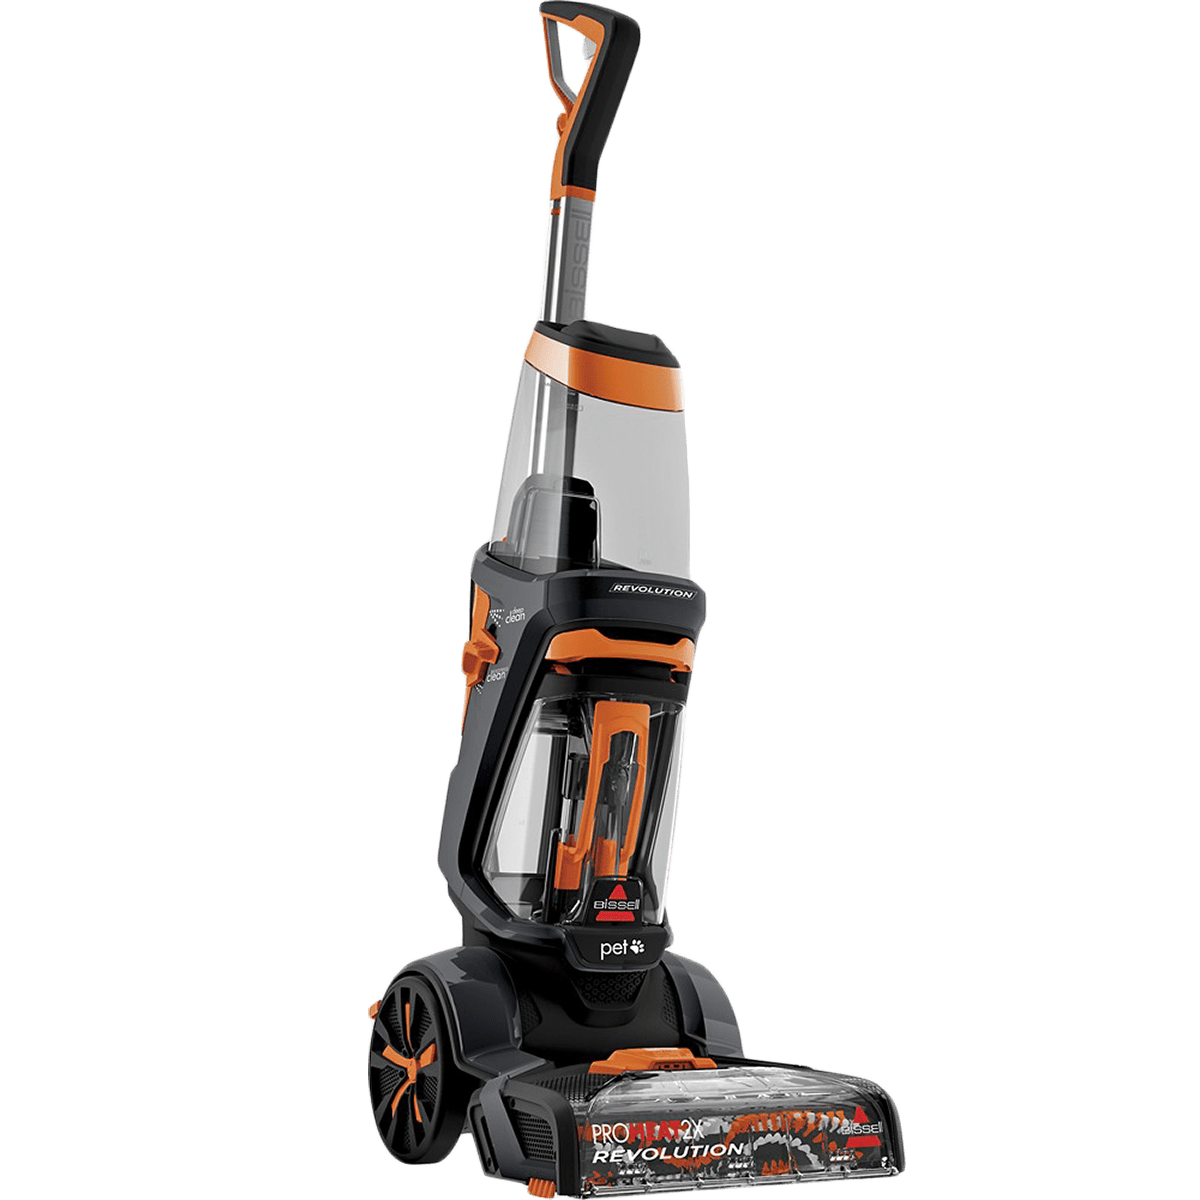 BISSELL ProHeat 2X Revolution Pet Full Size Carpet Cleaner, 35797